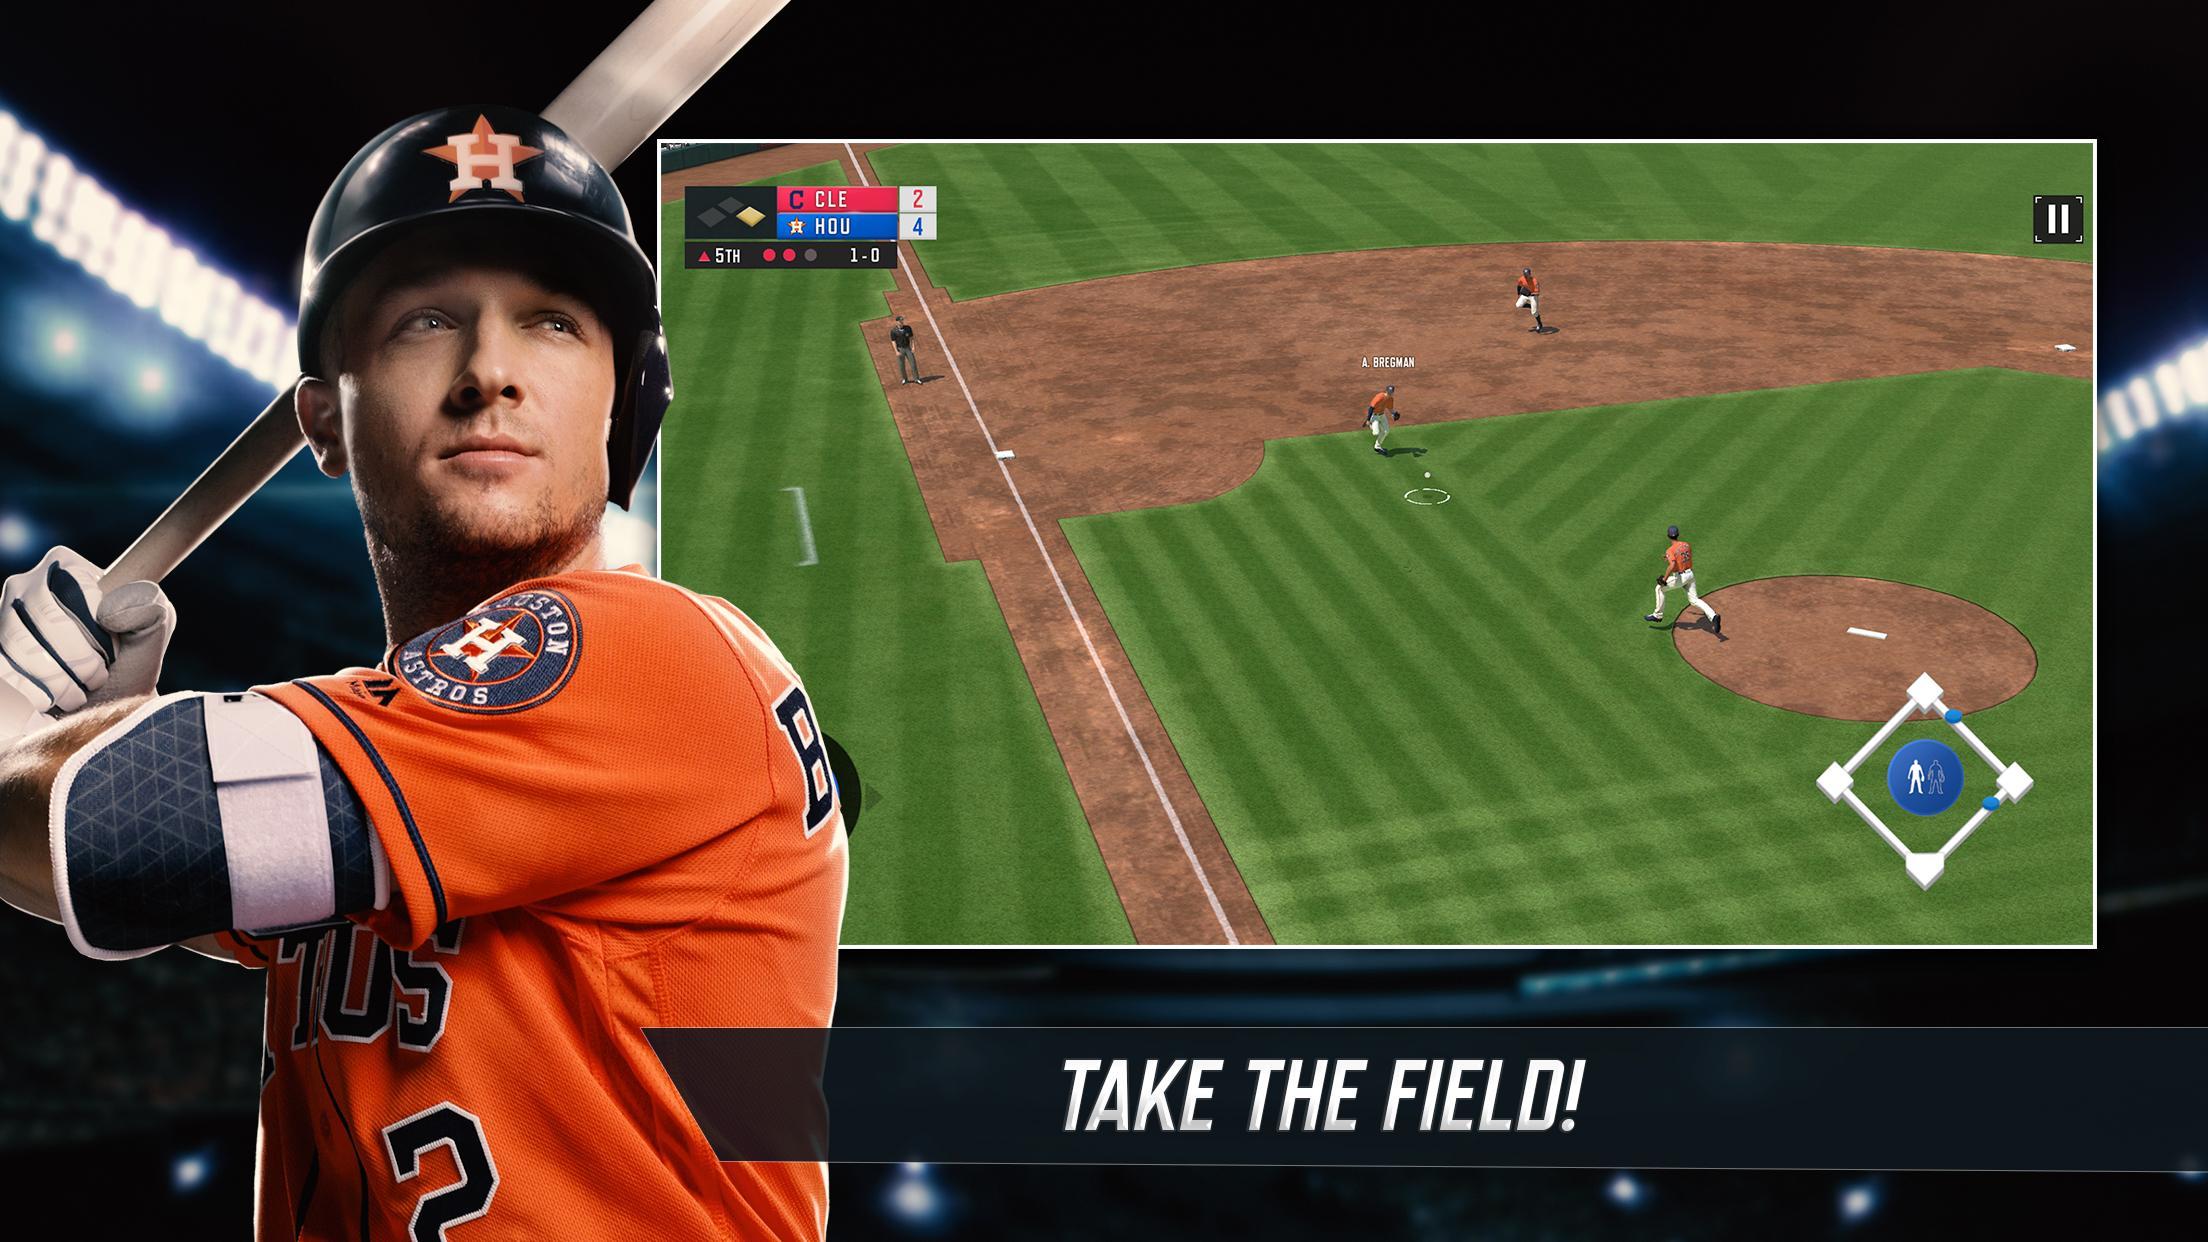 R.B.I. Baseball 19 for Android - APK Download